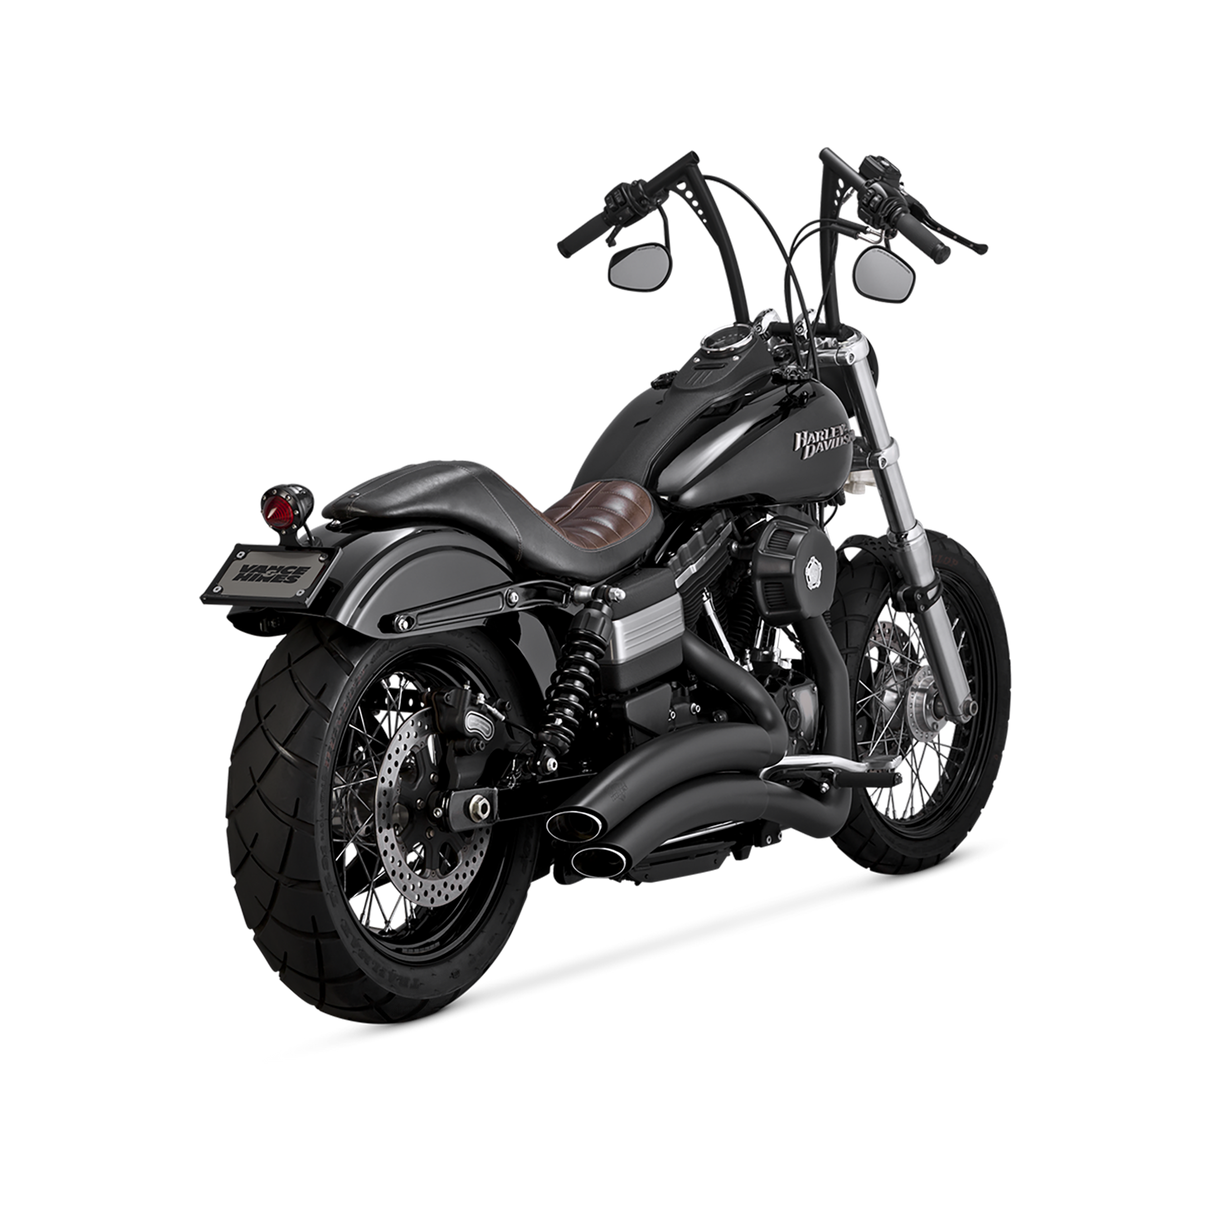 V&H Super Radius Dyna 06-17 (Excl Switchback, 2017 Fxdl And All 2Up Bikes - Solo Rider Only) - Black